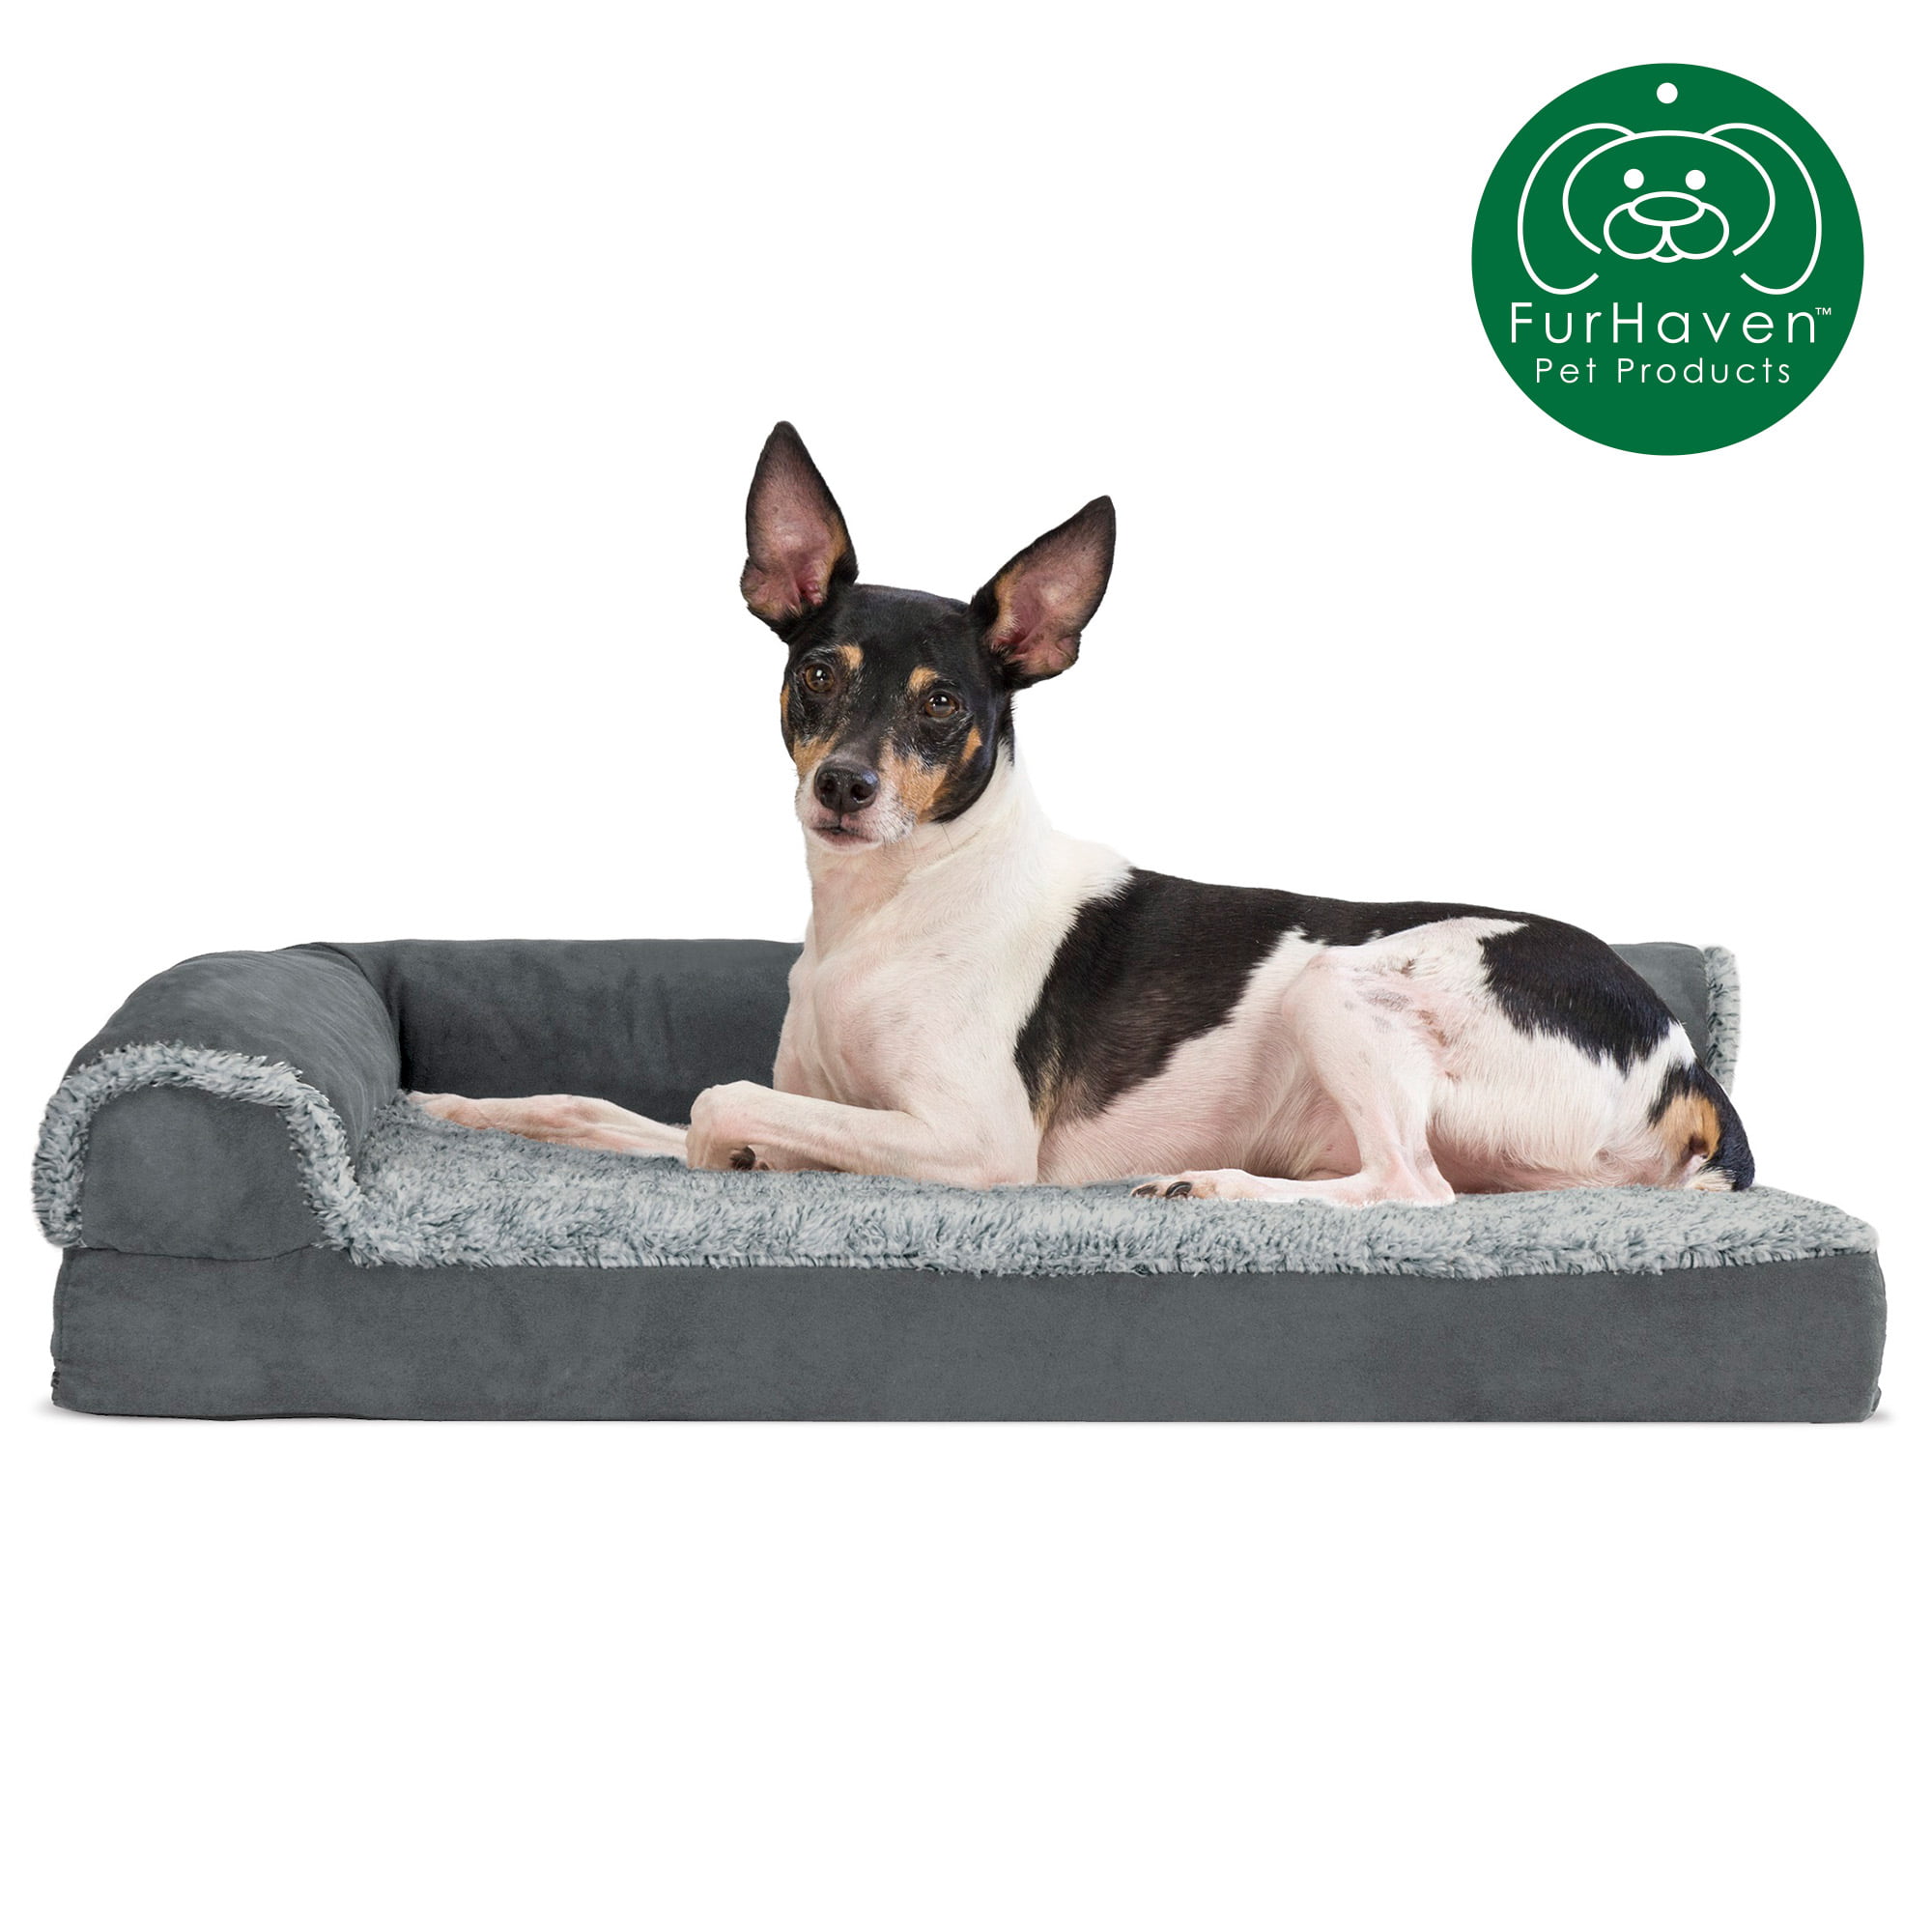 Available in Multiple Colors & Styles Deluxe Pillow Cushion Chaise Lounge Sofa-Style Living Room Couch Pet Bed w/ Removable Cover for Dogs & Cats Furhaven Pet Dog Bed